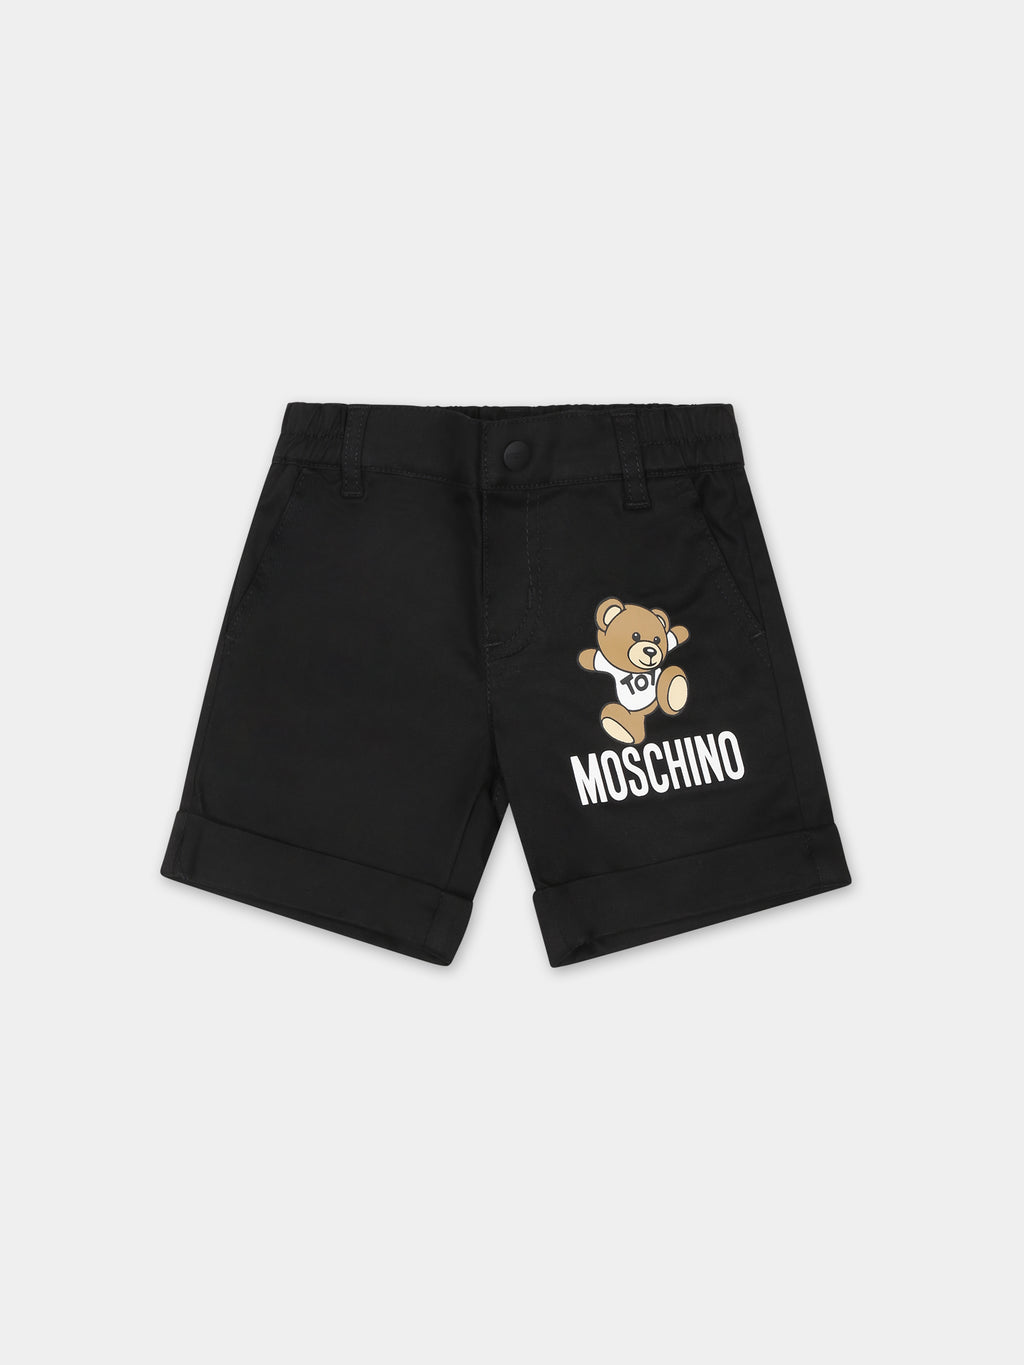 Black shorts for baby boy with Teddy bear and logo